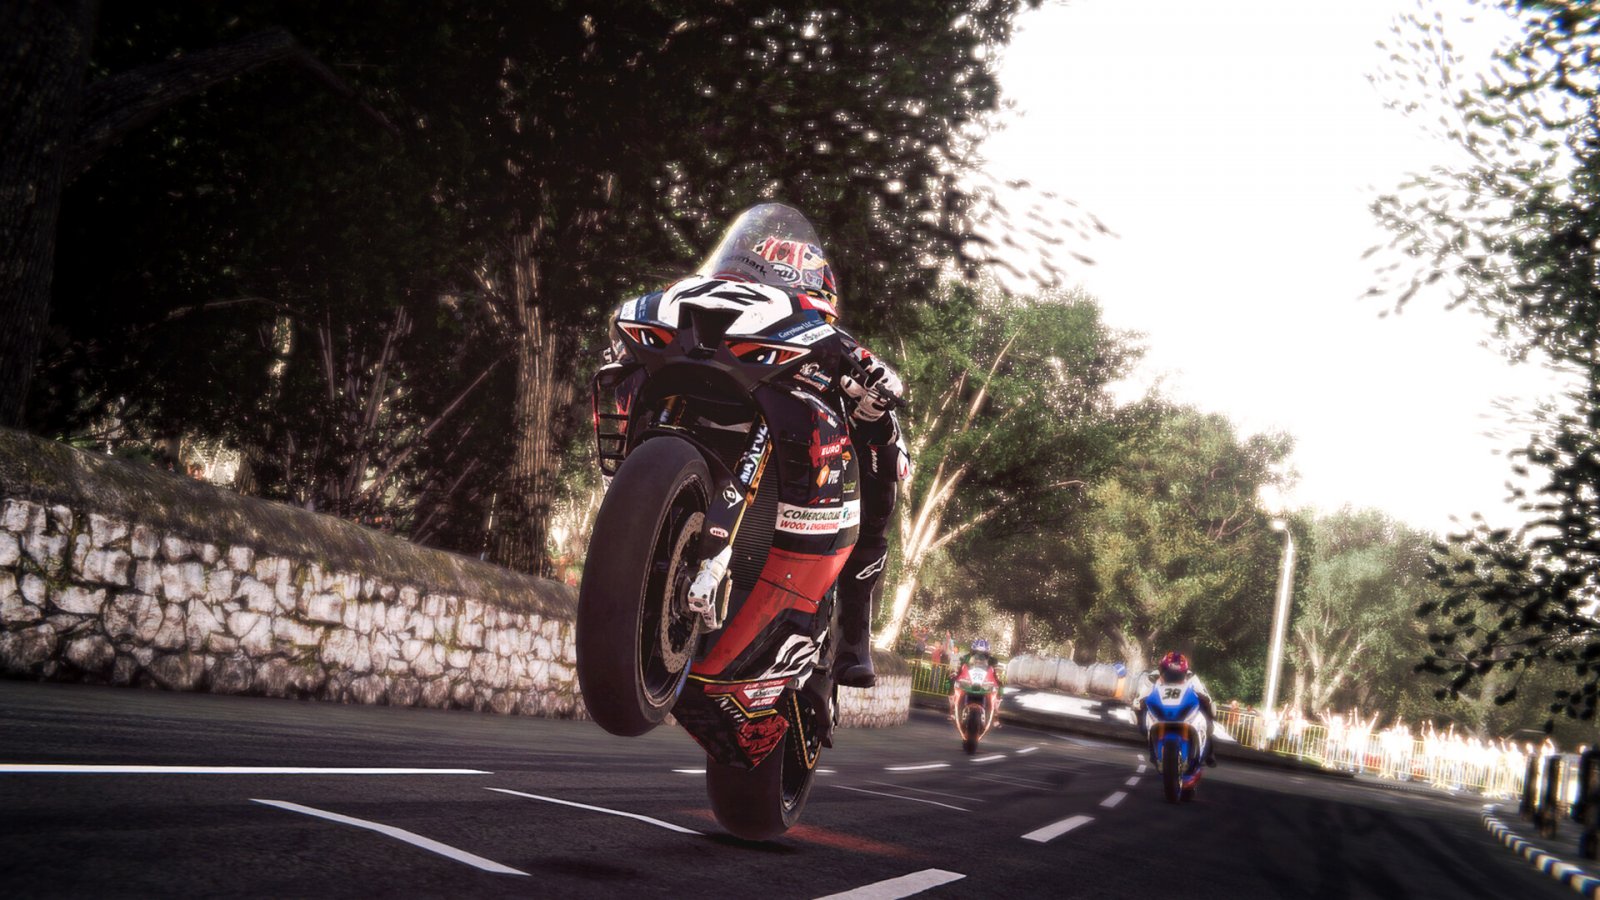 TT Isle of Man: Ride on the Edge 3, video mostra il gameplay del circuito di Snaefell Mountain